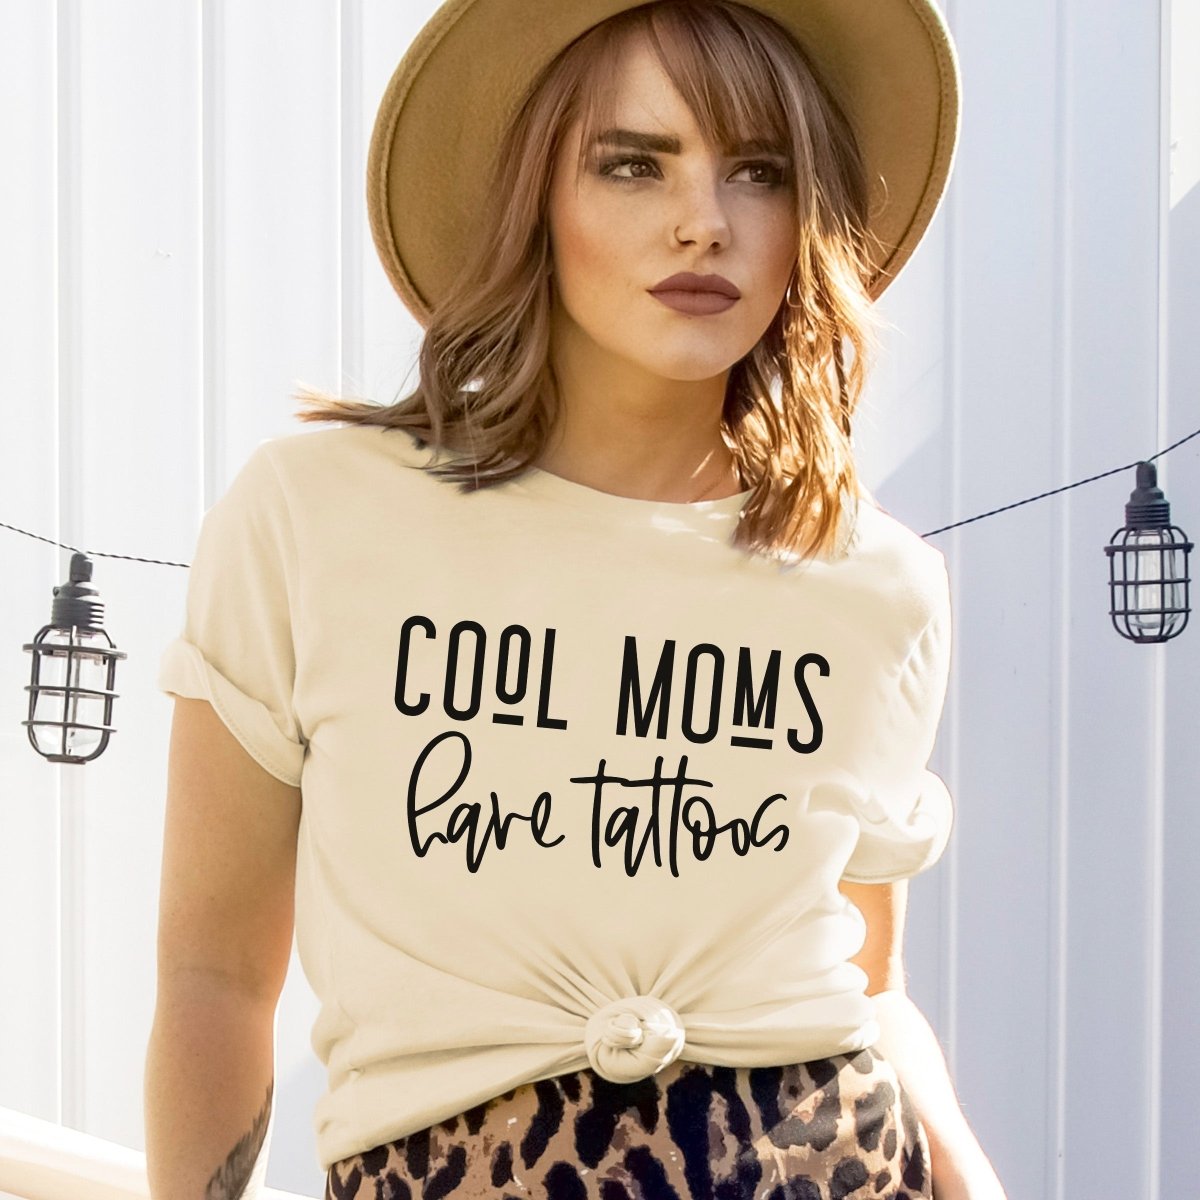 Cool Moms have tattoos Wholesale Tee - Limeberry Designs